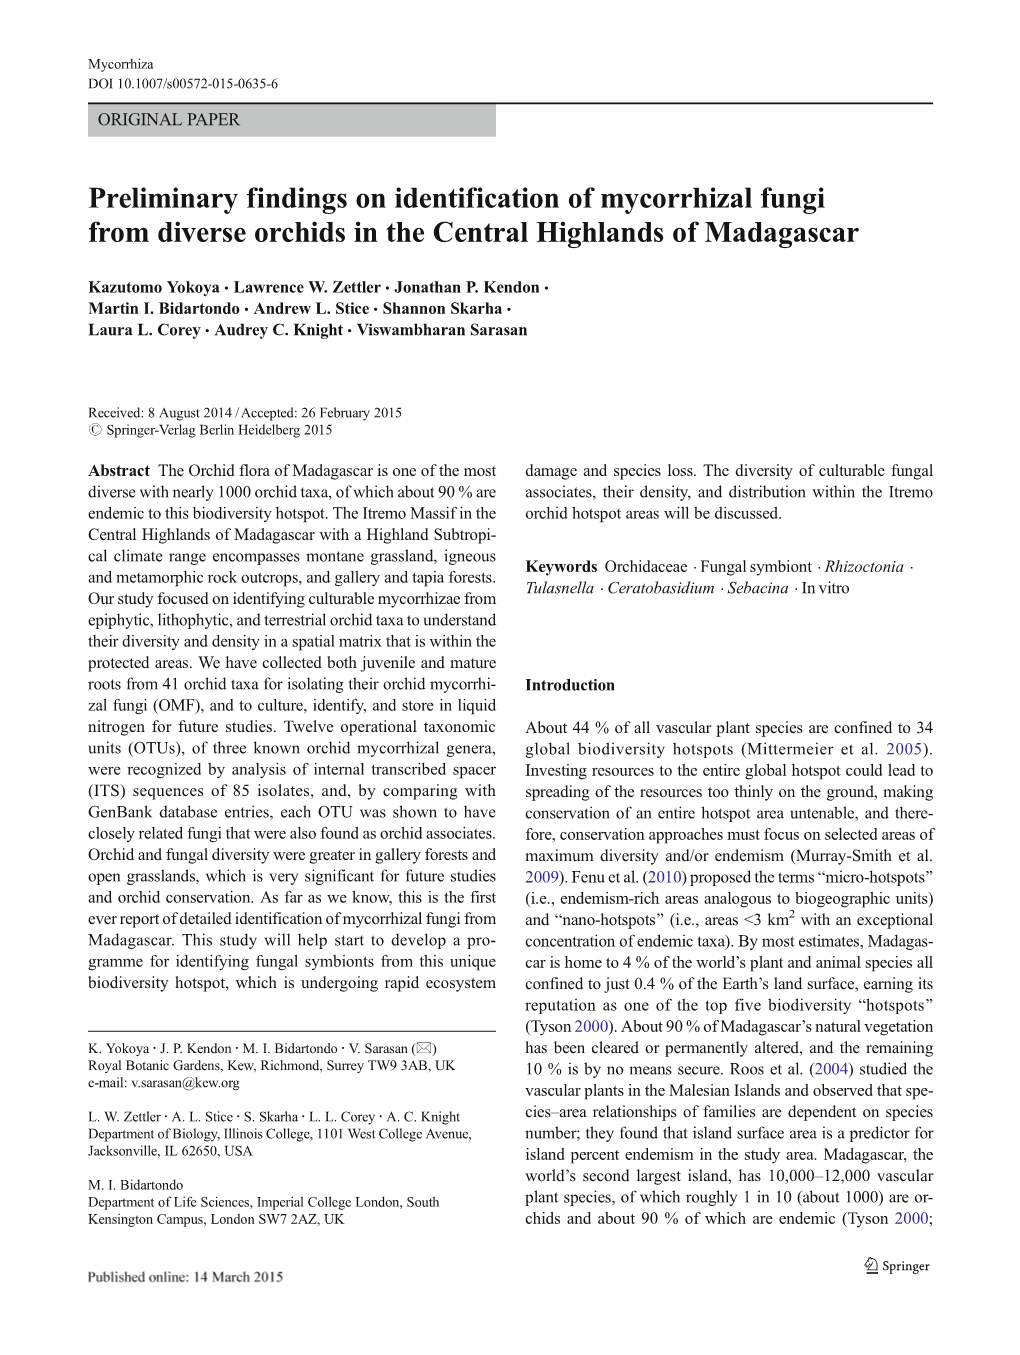 Preliminary Findings on Identification of Mycorrhizal Fungi from Diverse Orchids in the Central Highlands of Madagascar